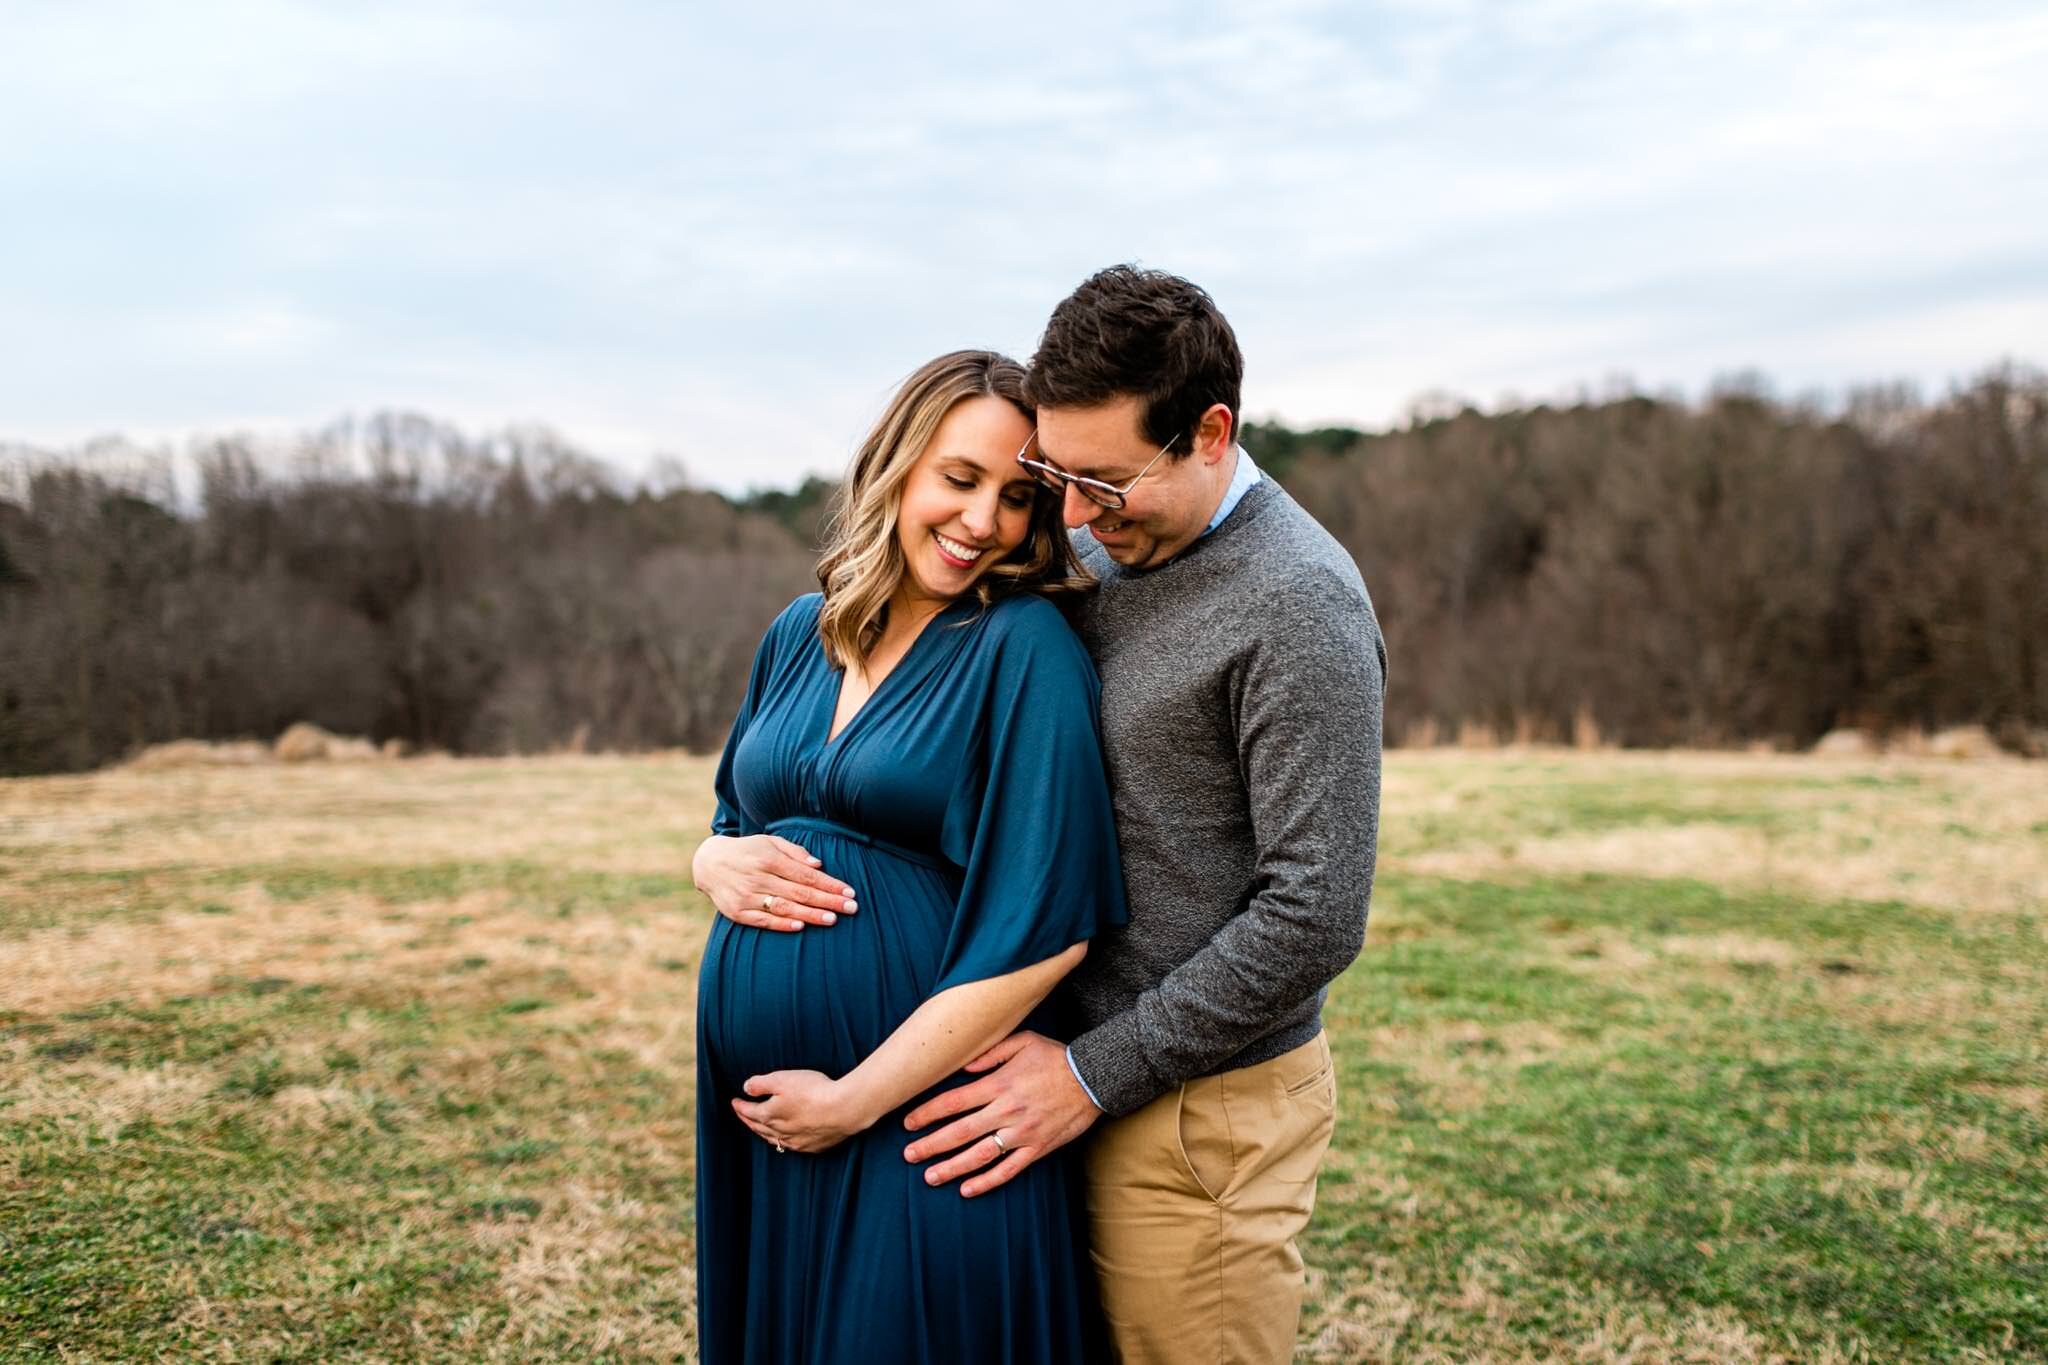 Raleigh Newborn Photographer | By G. Lin Photography | Couple standing in open field with woman holding baby bump